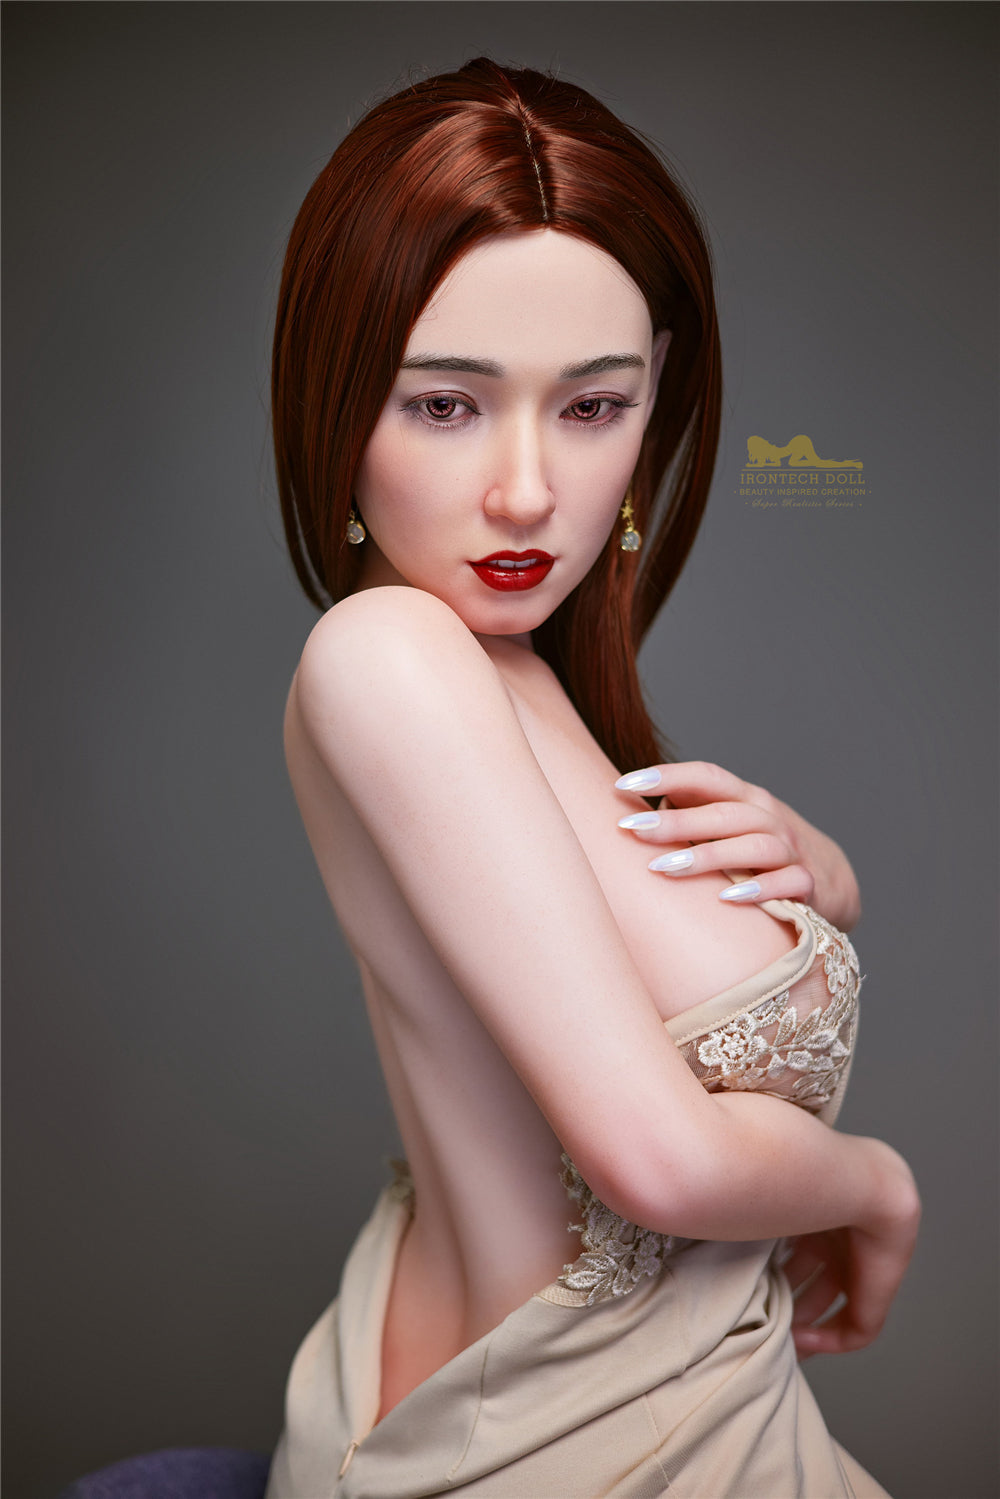 Irontech Doll 153 cm Silicone - Shelby | Buy Sex Dolls at DOLLS ACTUALLY